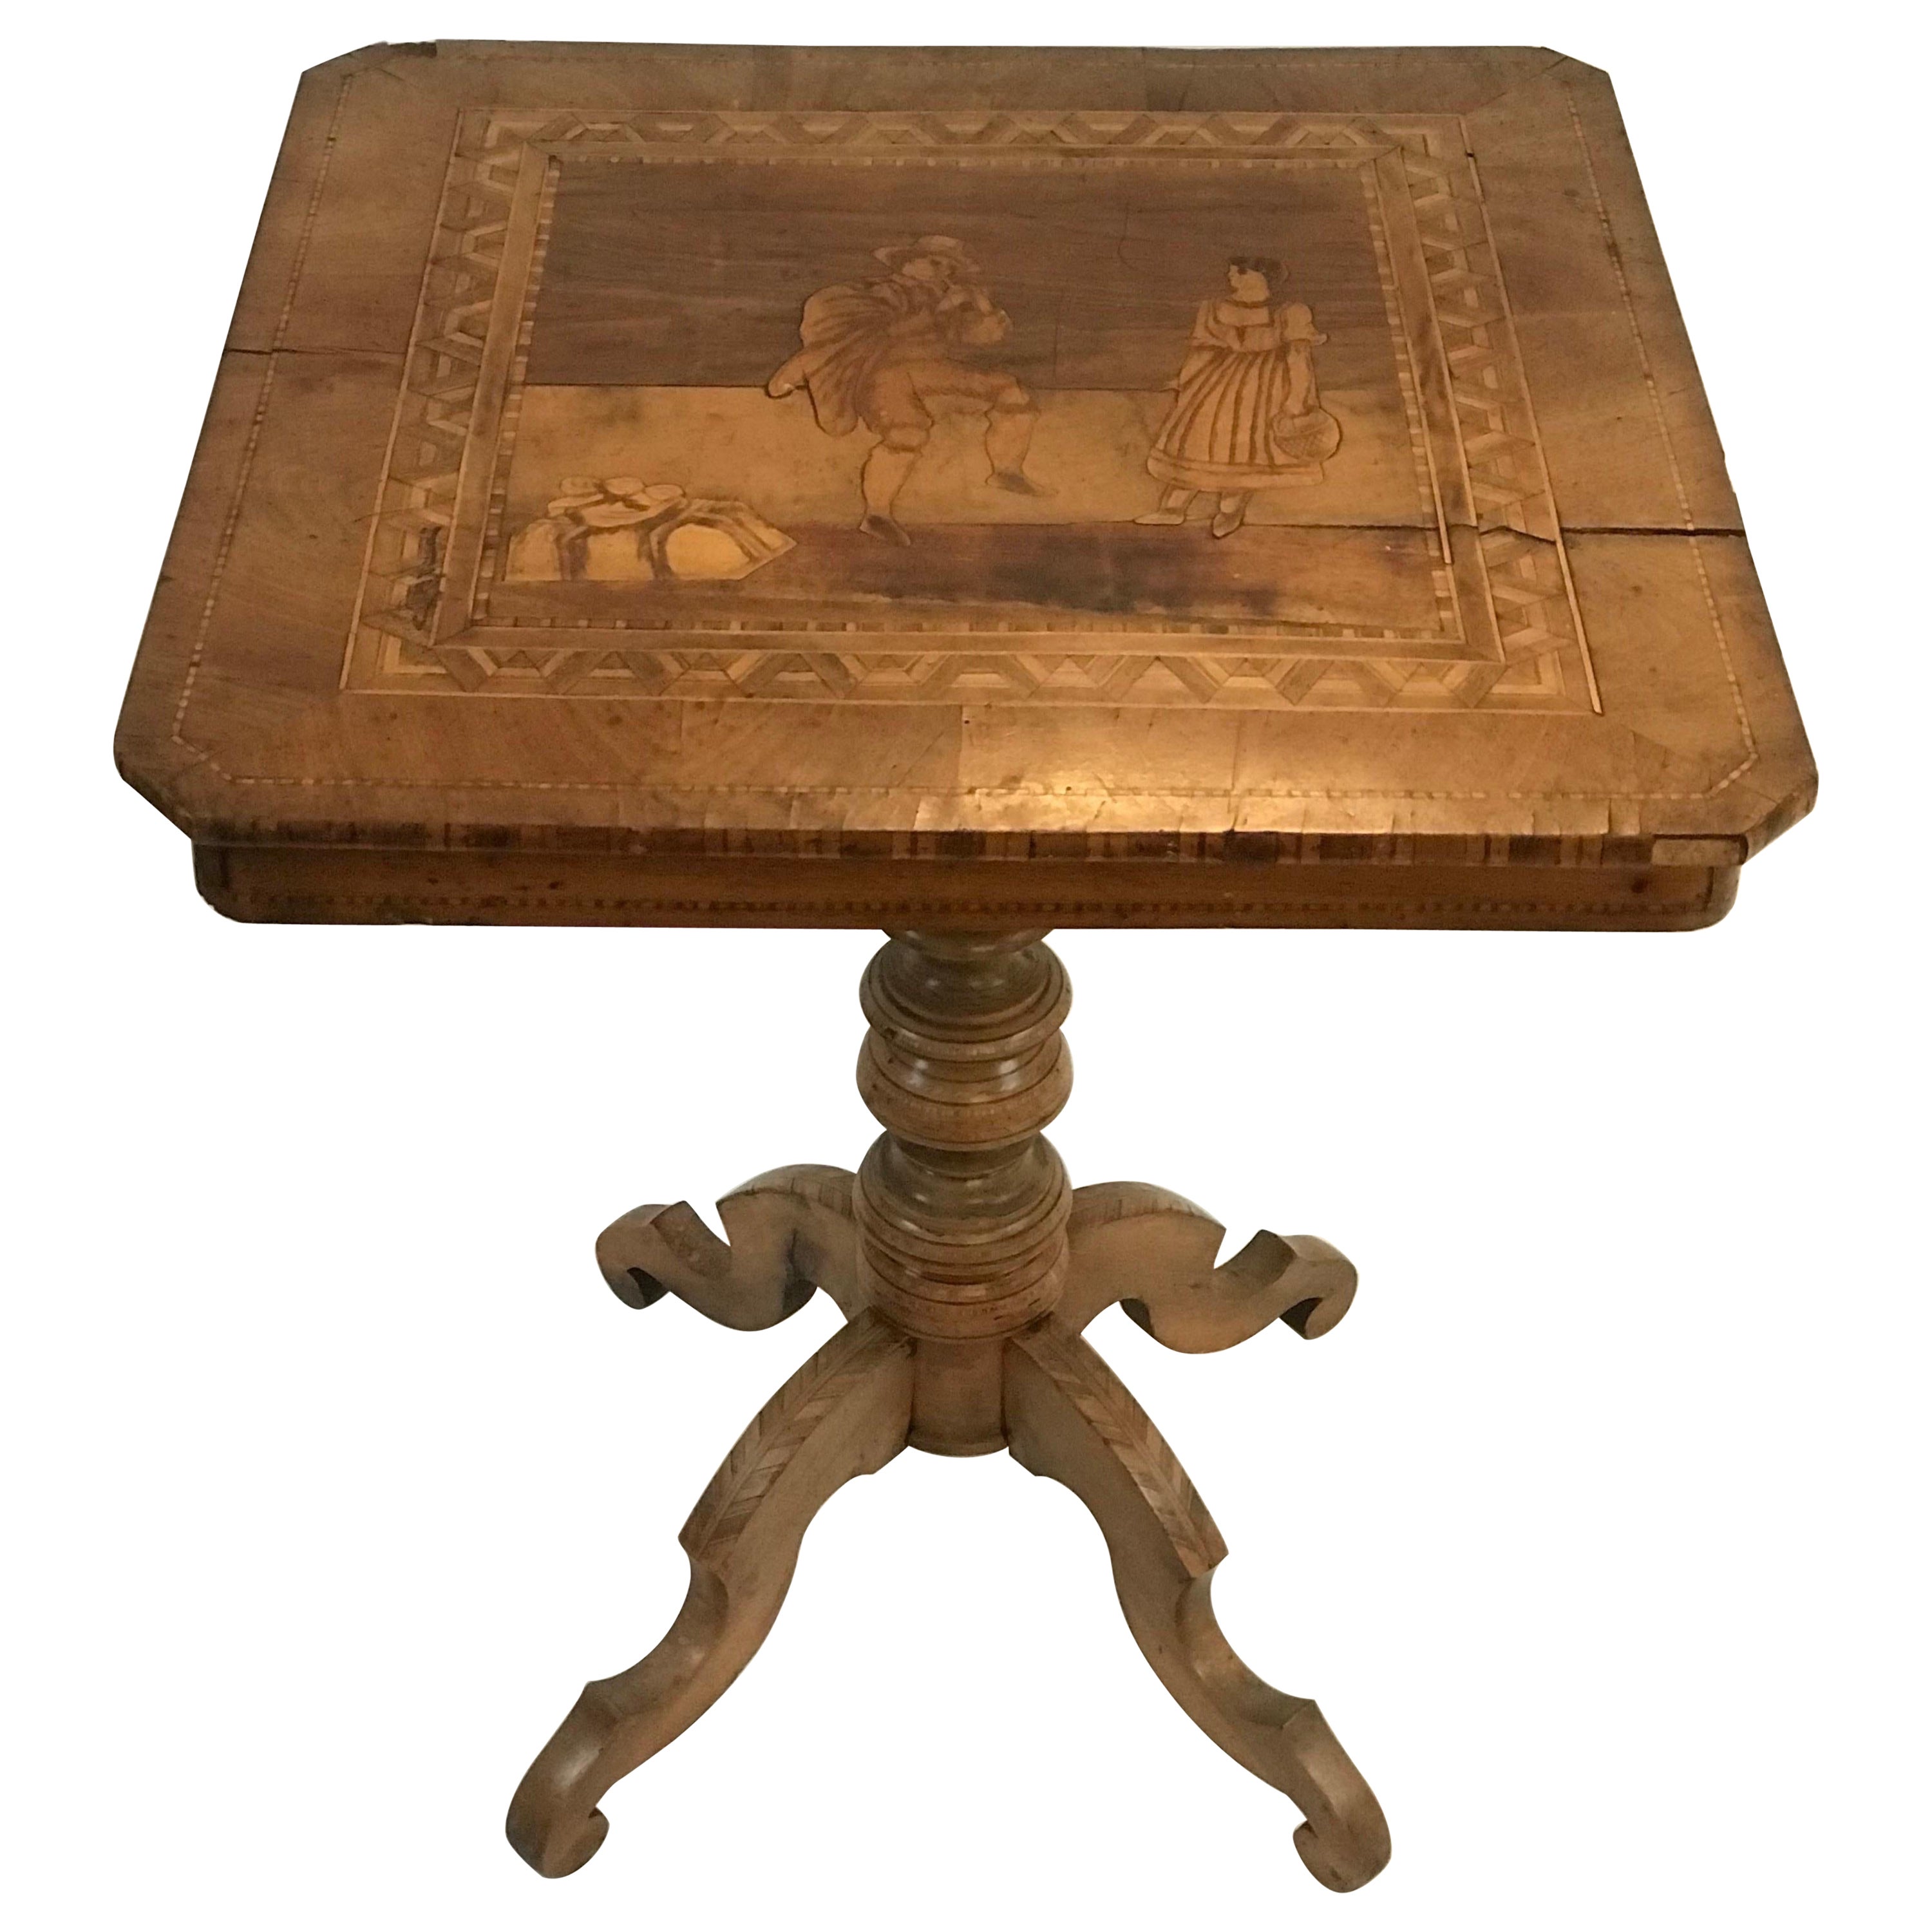 A Late 1800's Sorrento Marquetry Desert Table with Figural Classical Motif  For Sale